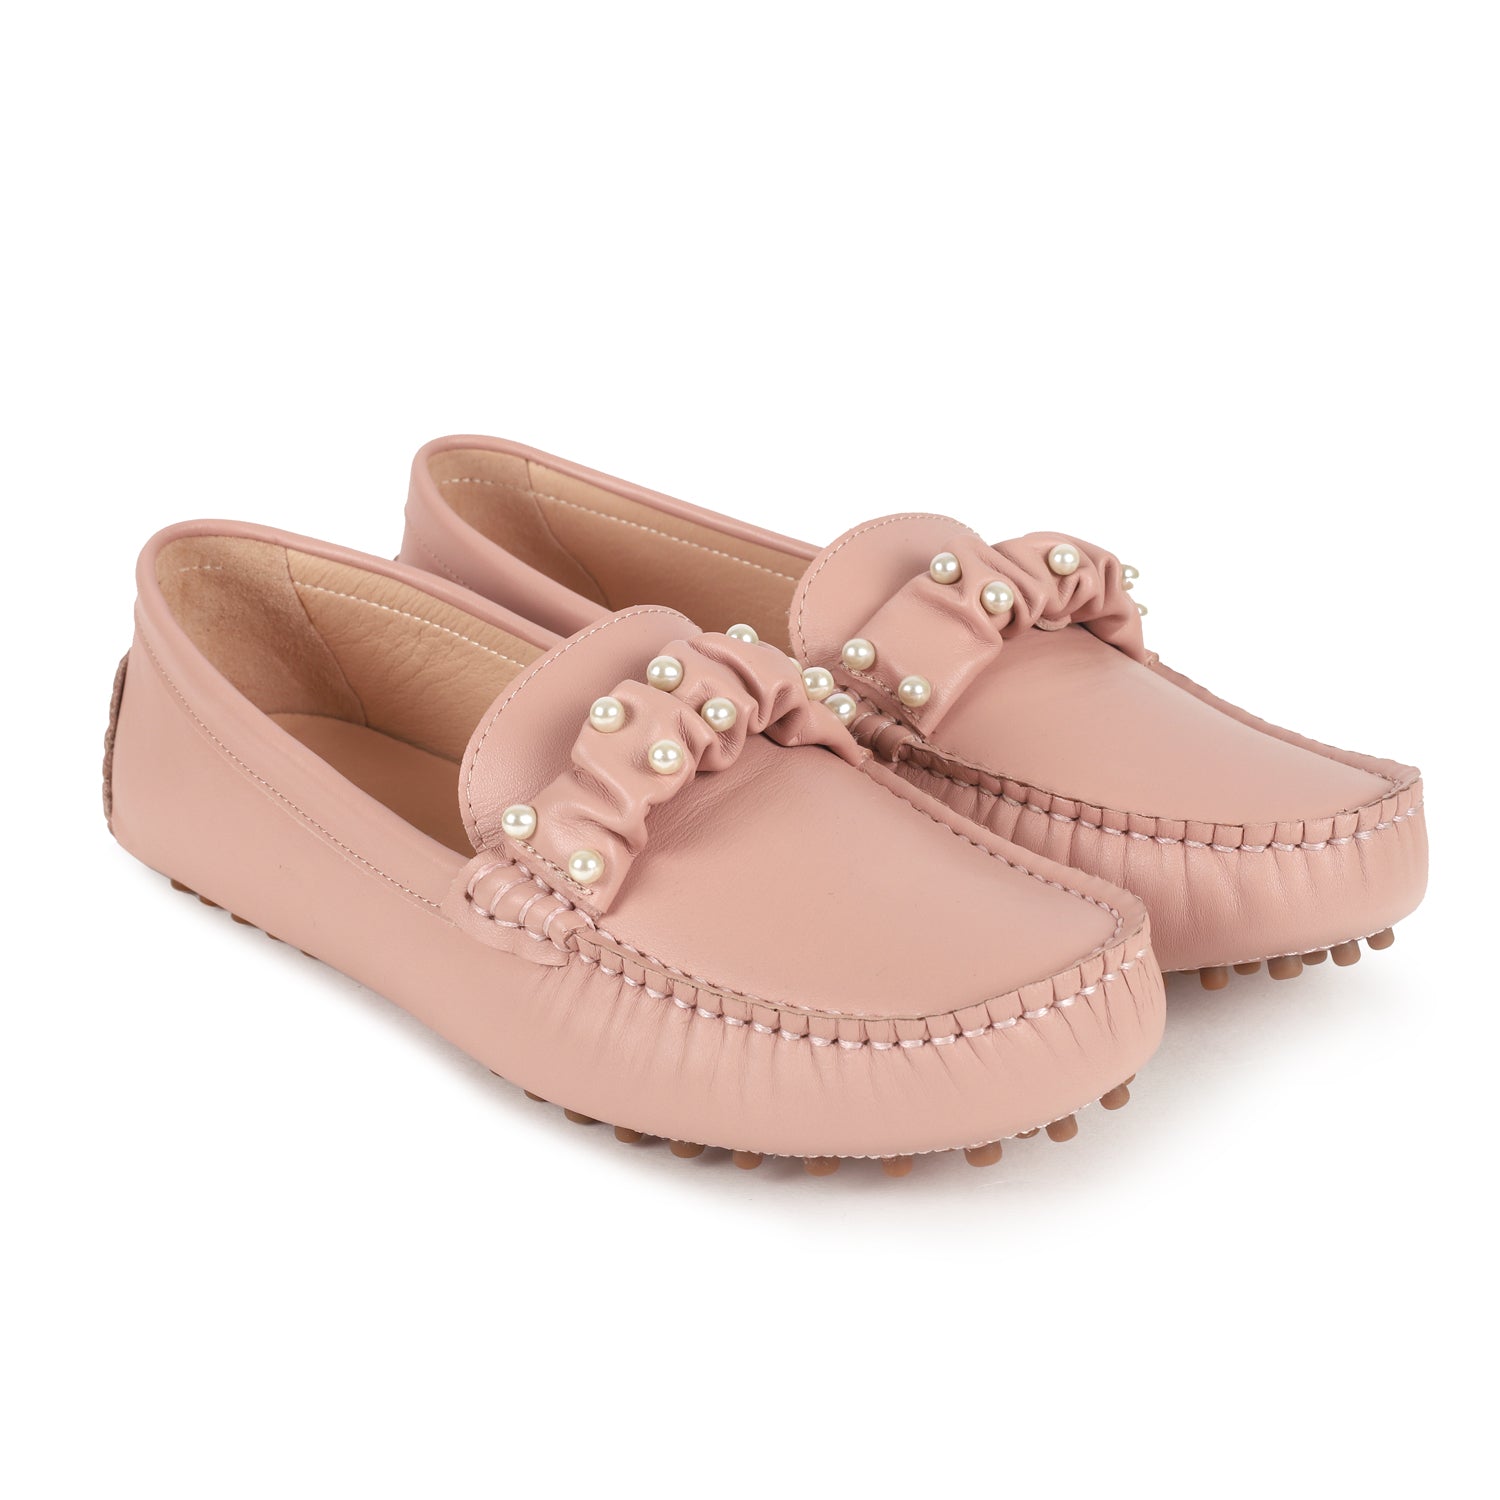 W613-12 Annalise Ruched Pearl Moccasins  Loafer - Pink